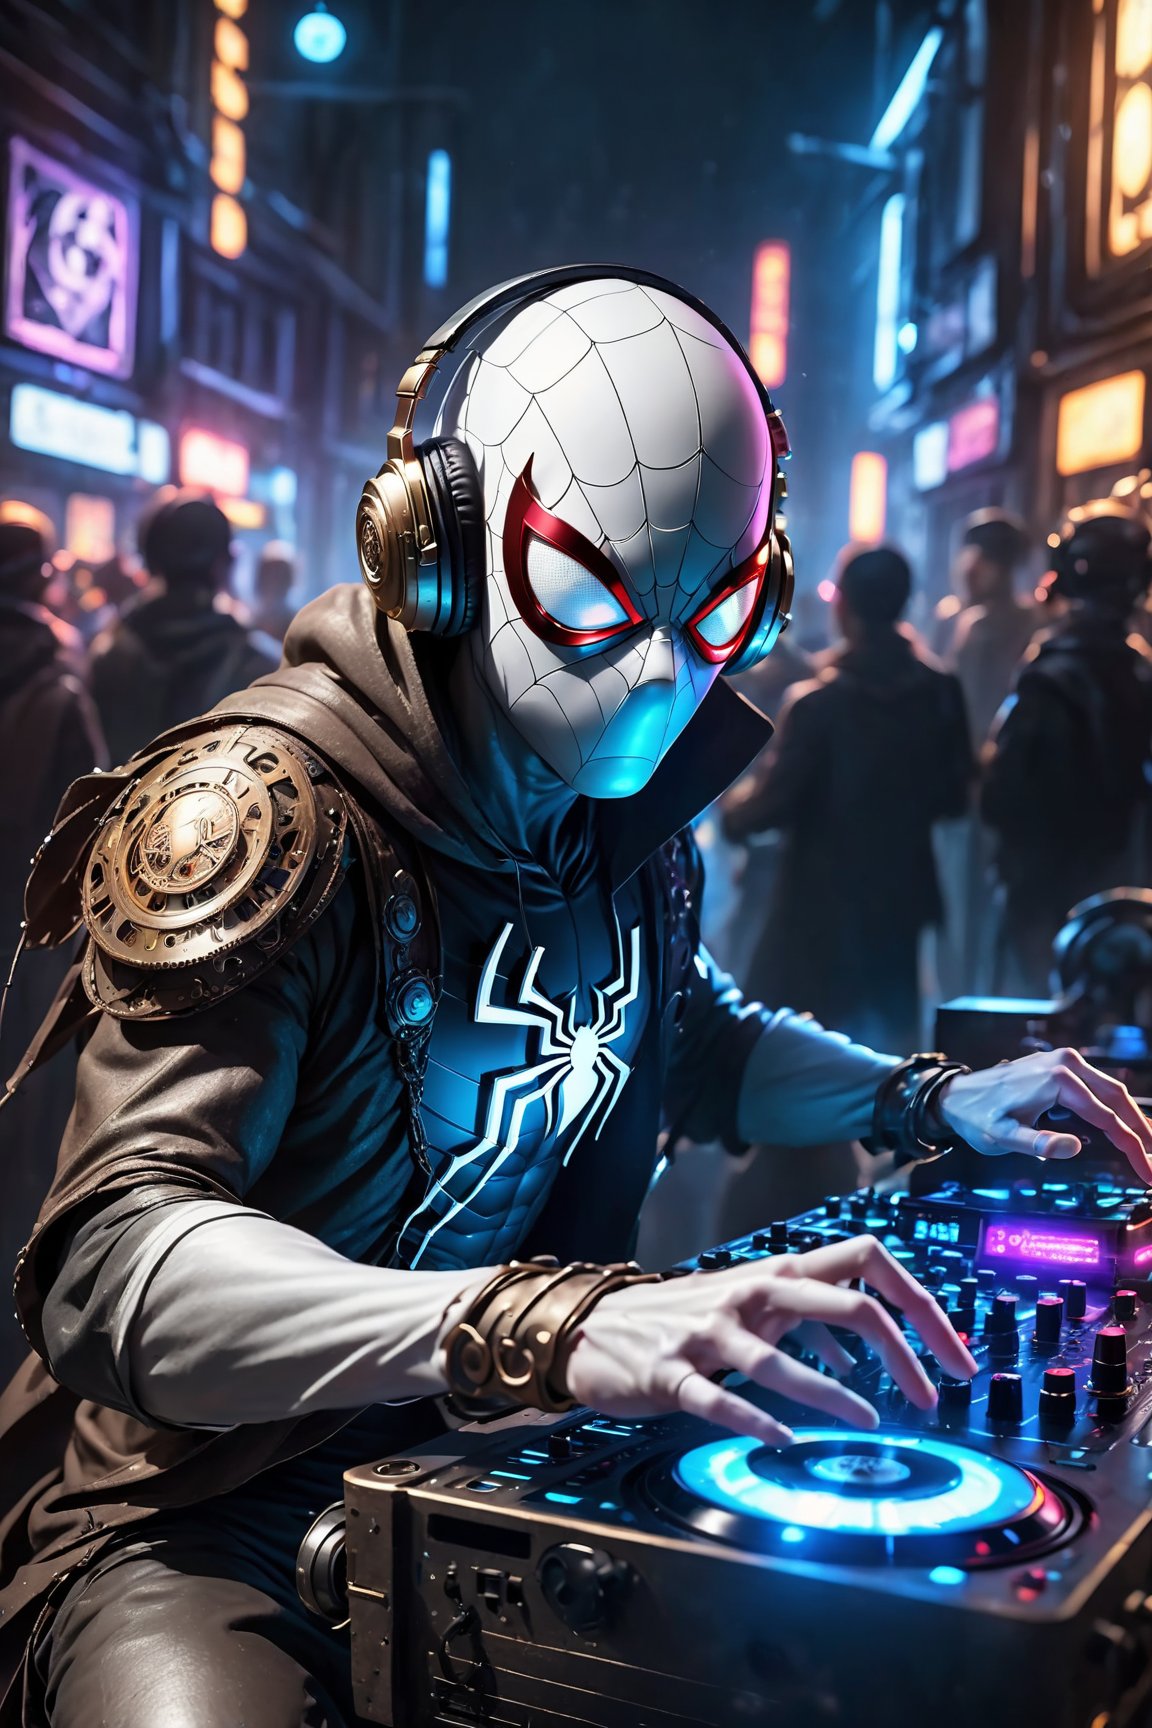 Best quality, high-res photo, cyber-steampunk style white spiderman ninja DJ in the night club, high-detailed, plays DJ instrument so passionly, cyber-steampunk style, DJ instrument, neon gears panels,  DJ headphone , crowd background, neon sparks, energic, full passion, enthusiasm, leds, sparkling, ,cyberpunk style,steampunk style